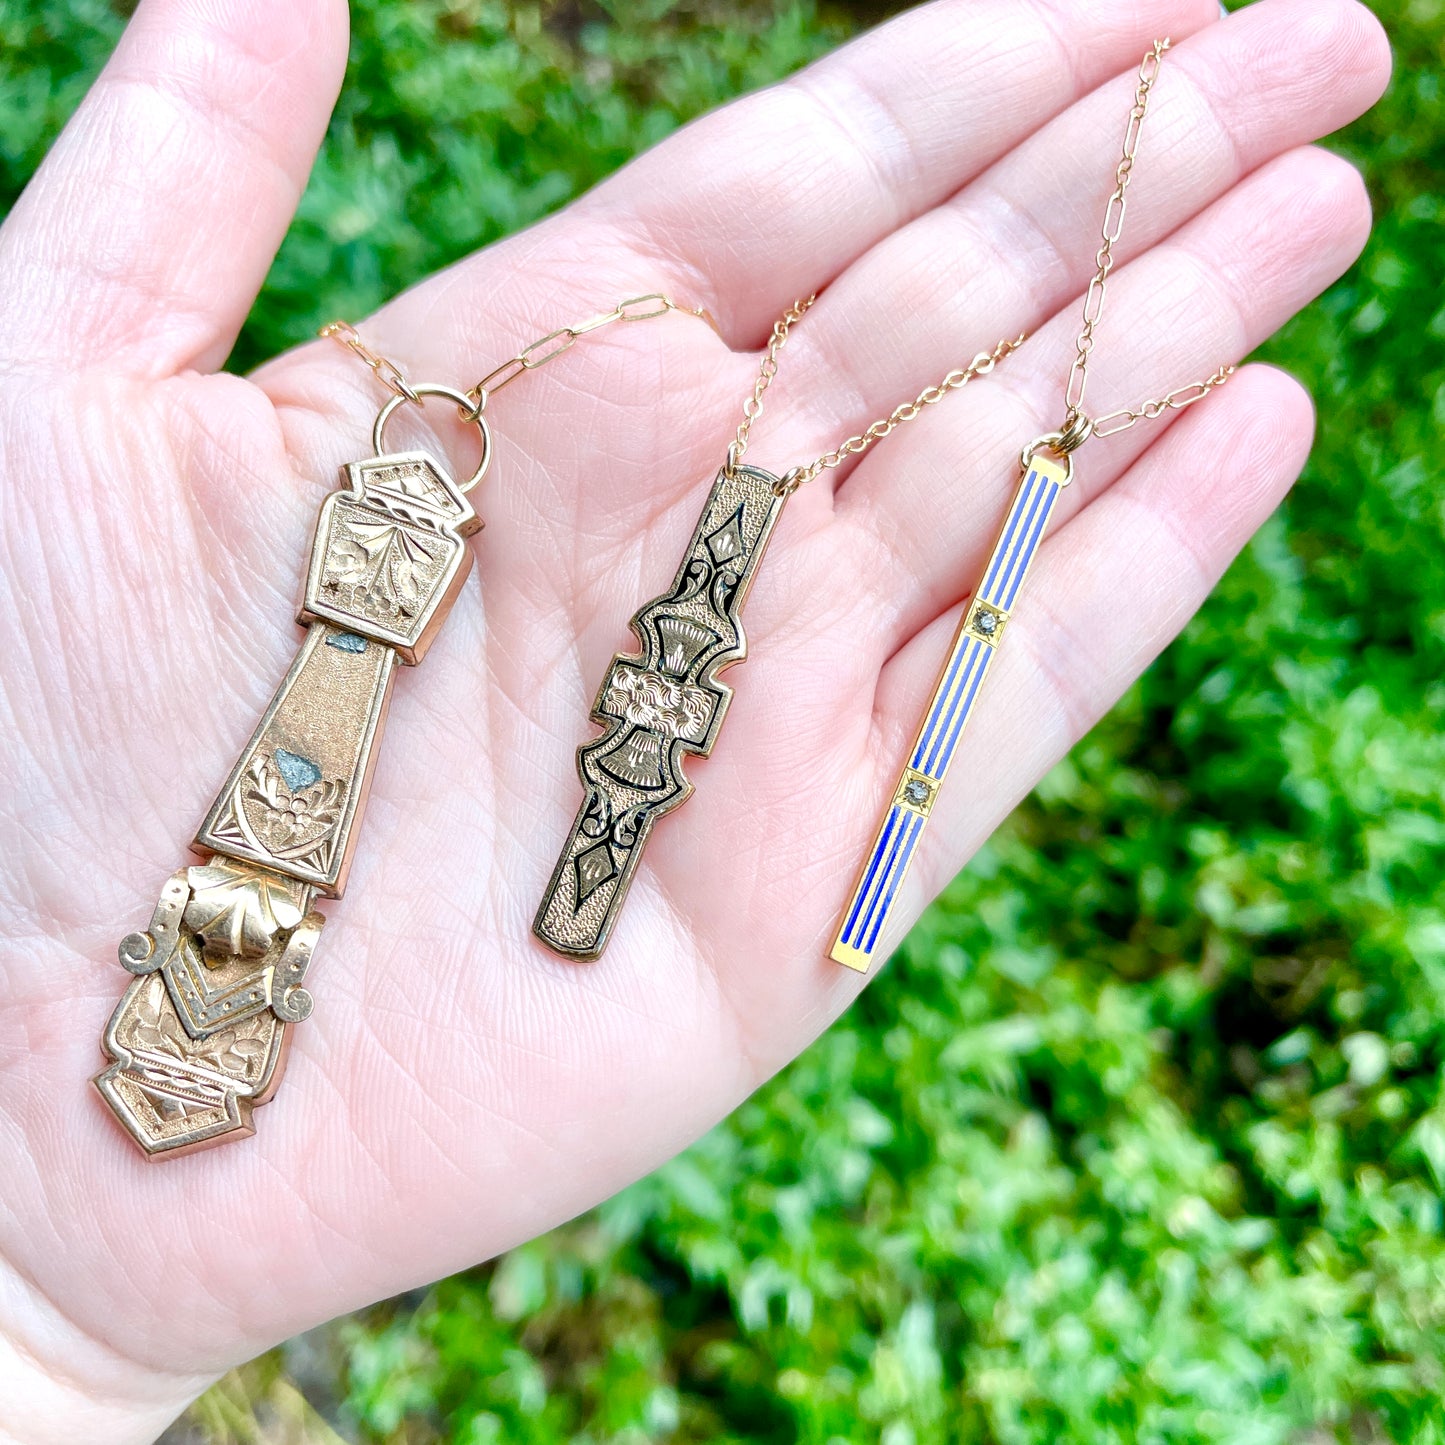 Three antique vertical bar pin pendant necklaces held on a flat palm of a left hand with green foliage in the background.